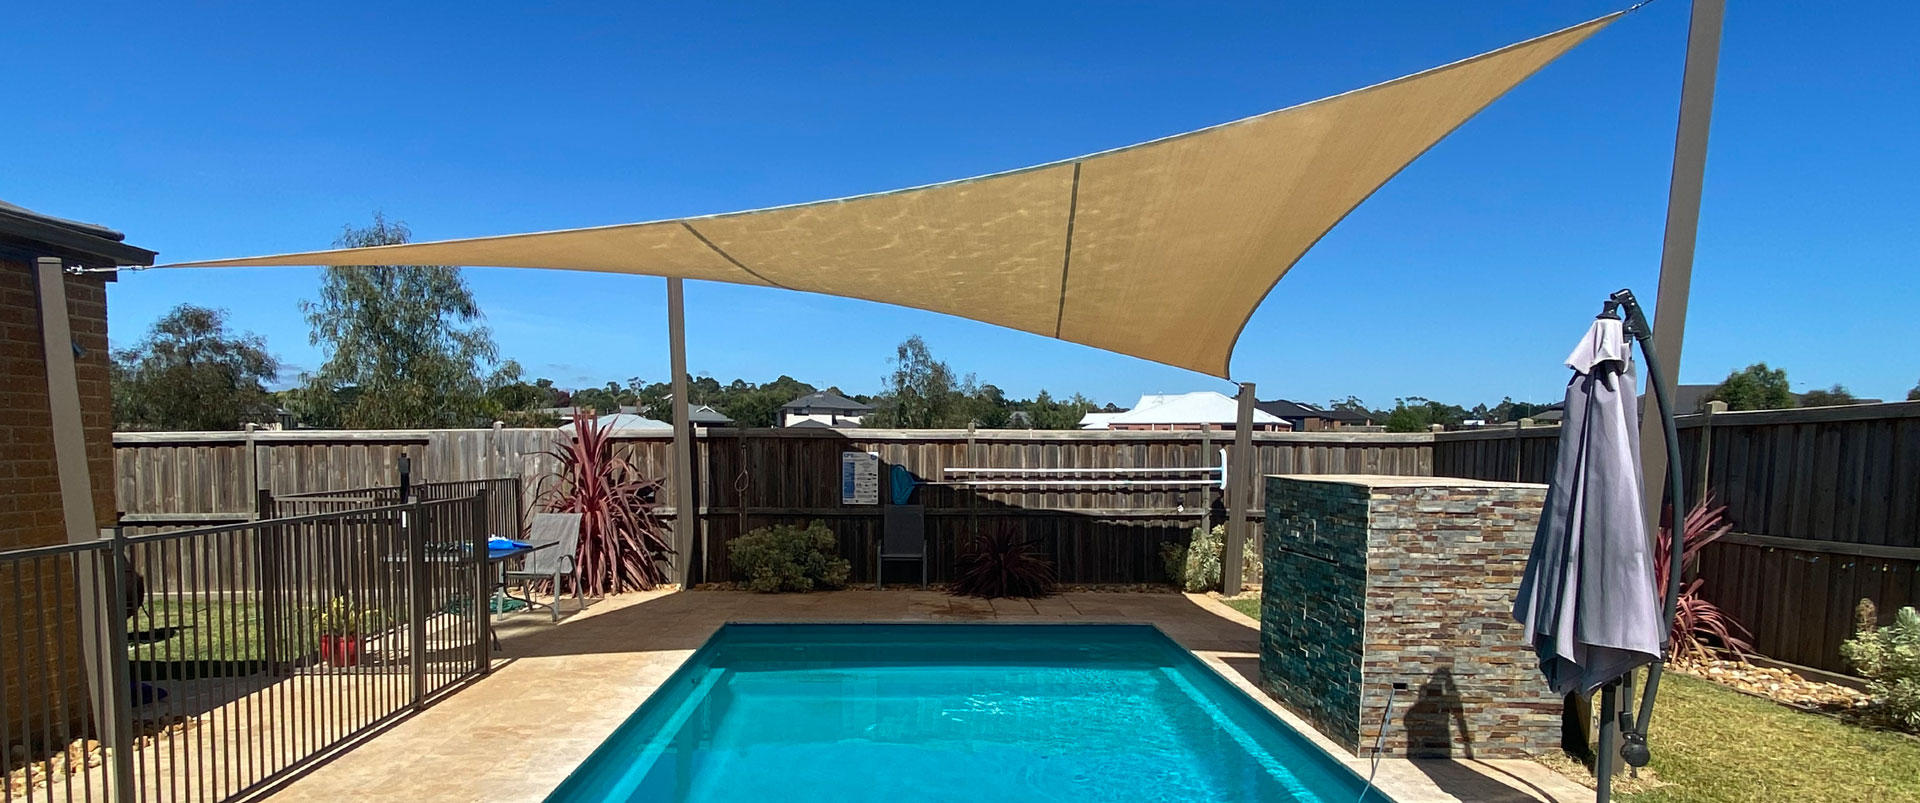 Swimming Pool Shade Sales | Shade Sails | Shade Structures | Domestic Shade Sails | Commercial Shade Sails | School Shade Sales | Blinds & Awnings | Swimming Pool Shade Sails | Shade Sails Mornington | Shade Sails Melbourne